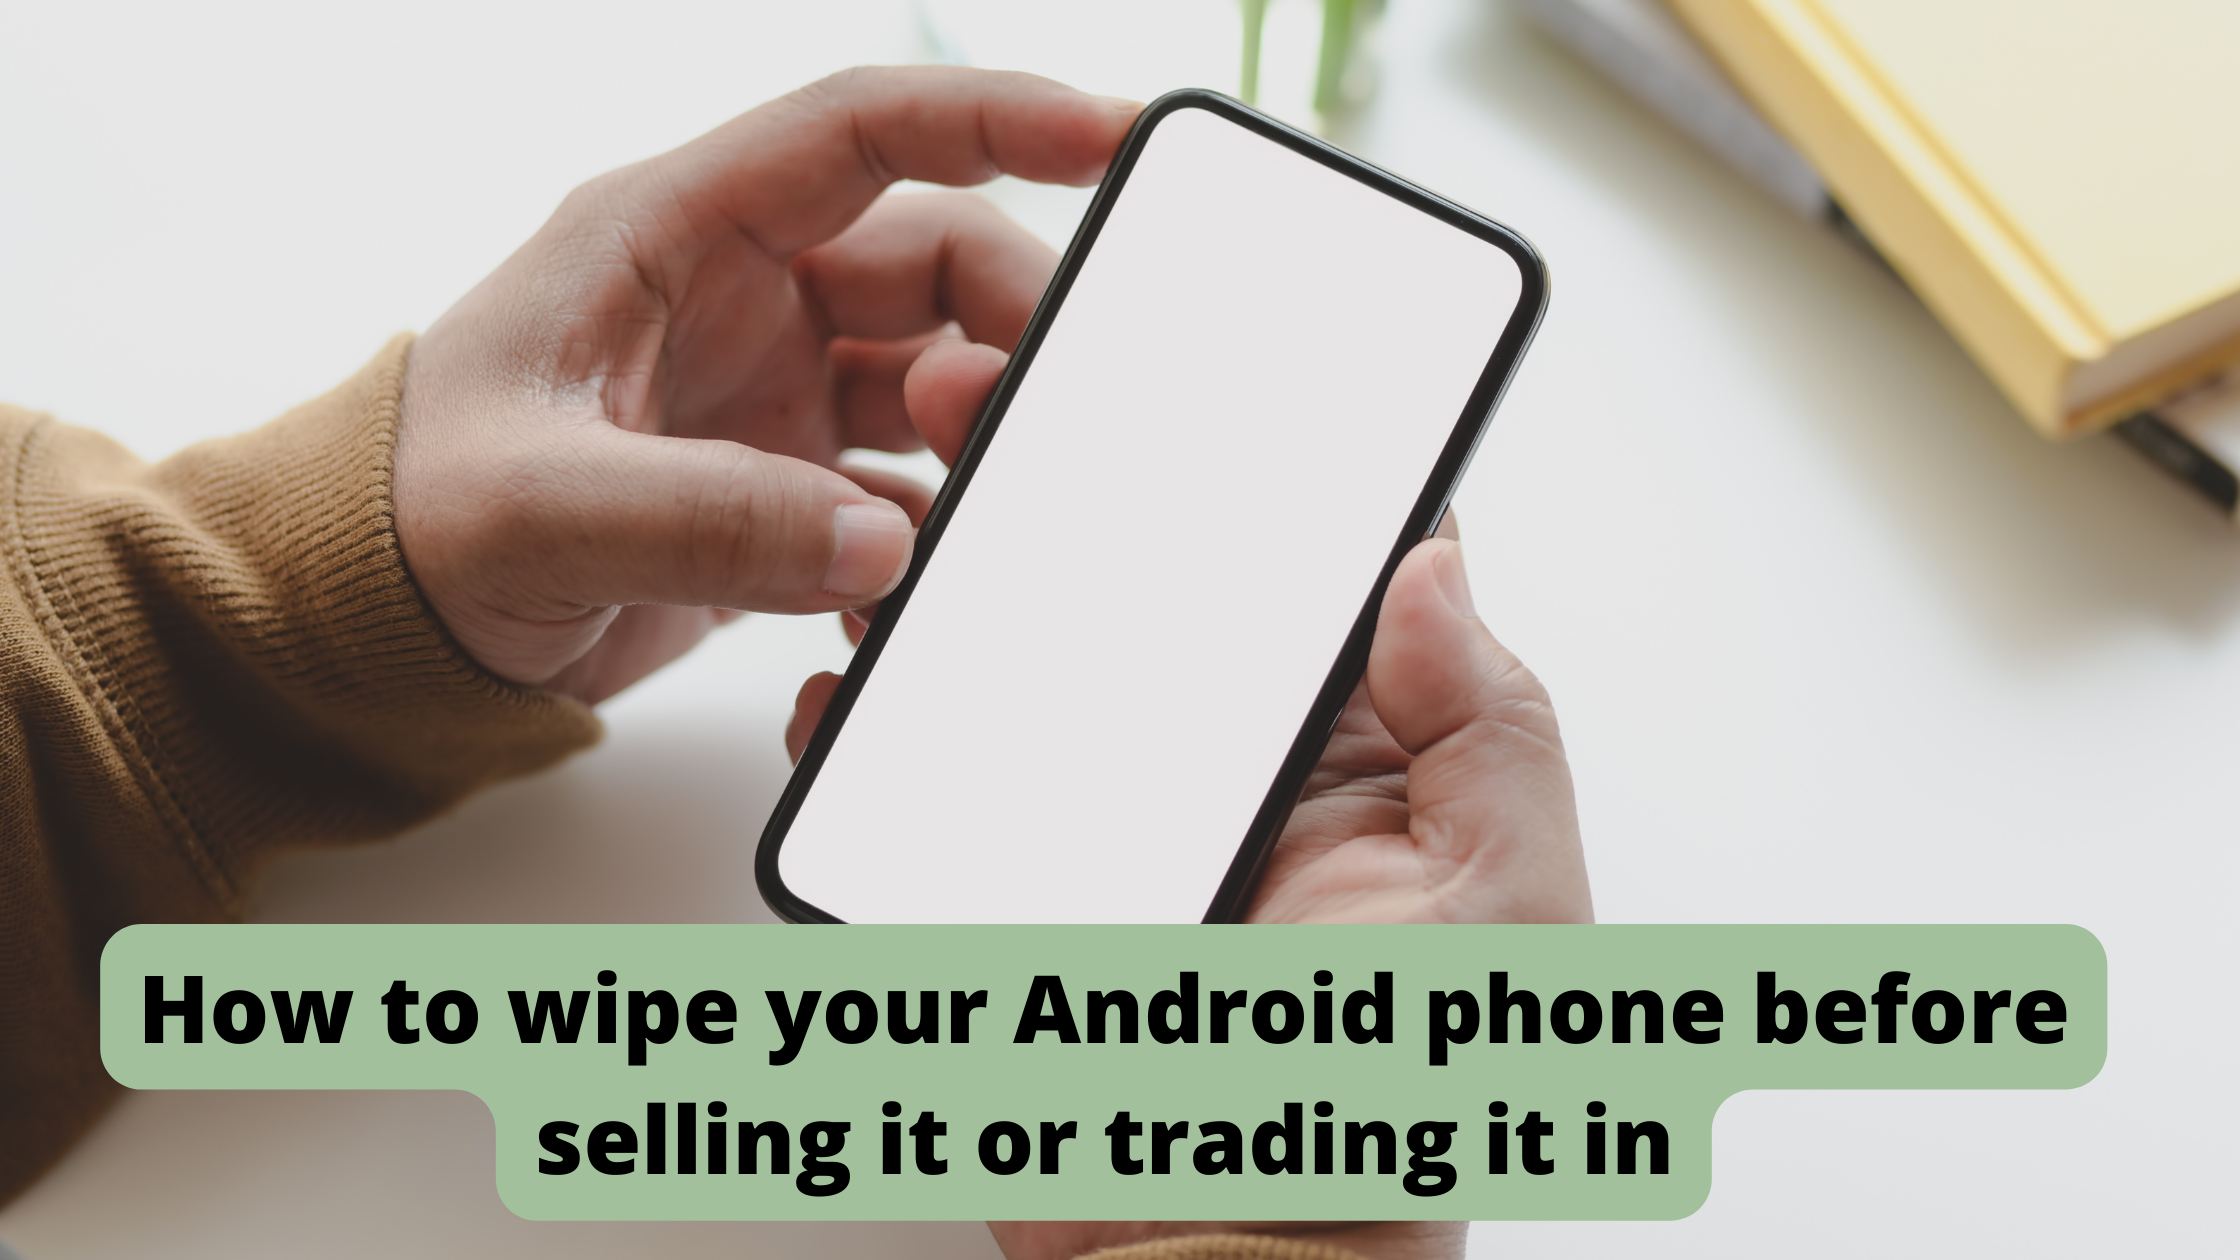 How to wipe your Android phone before selling it or trading it in